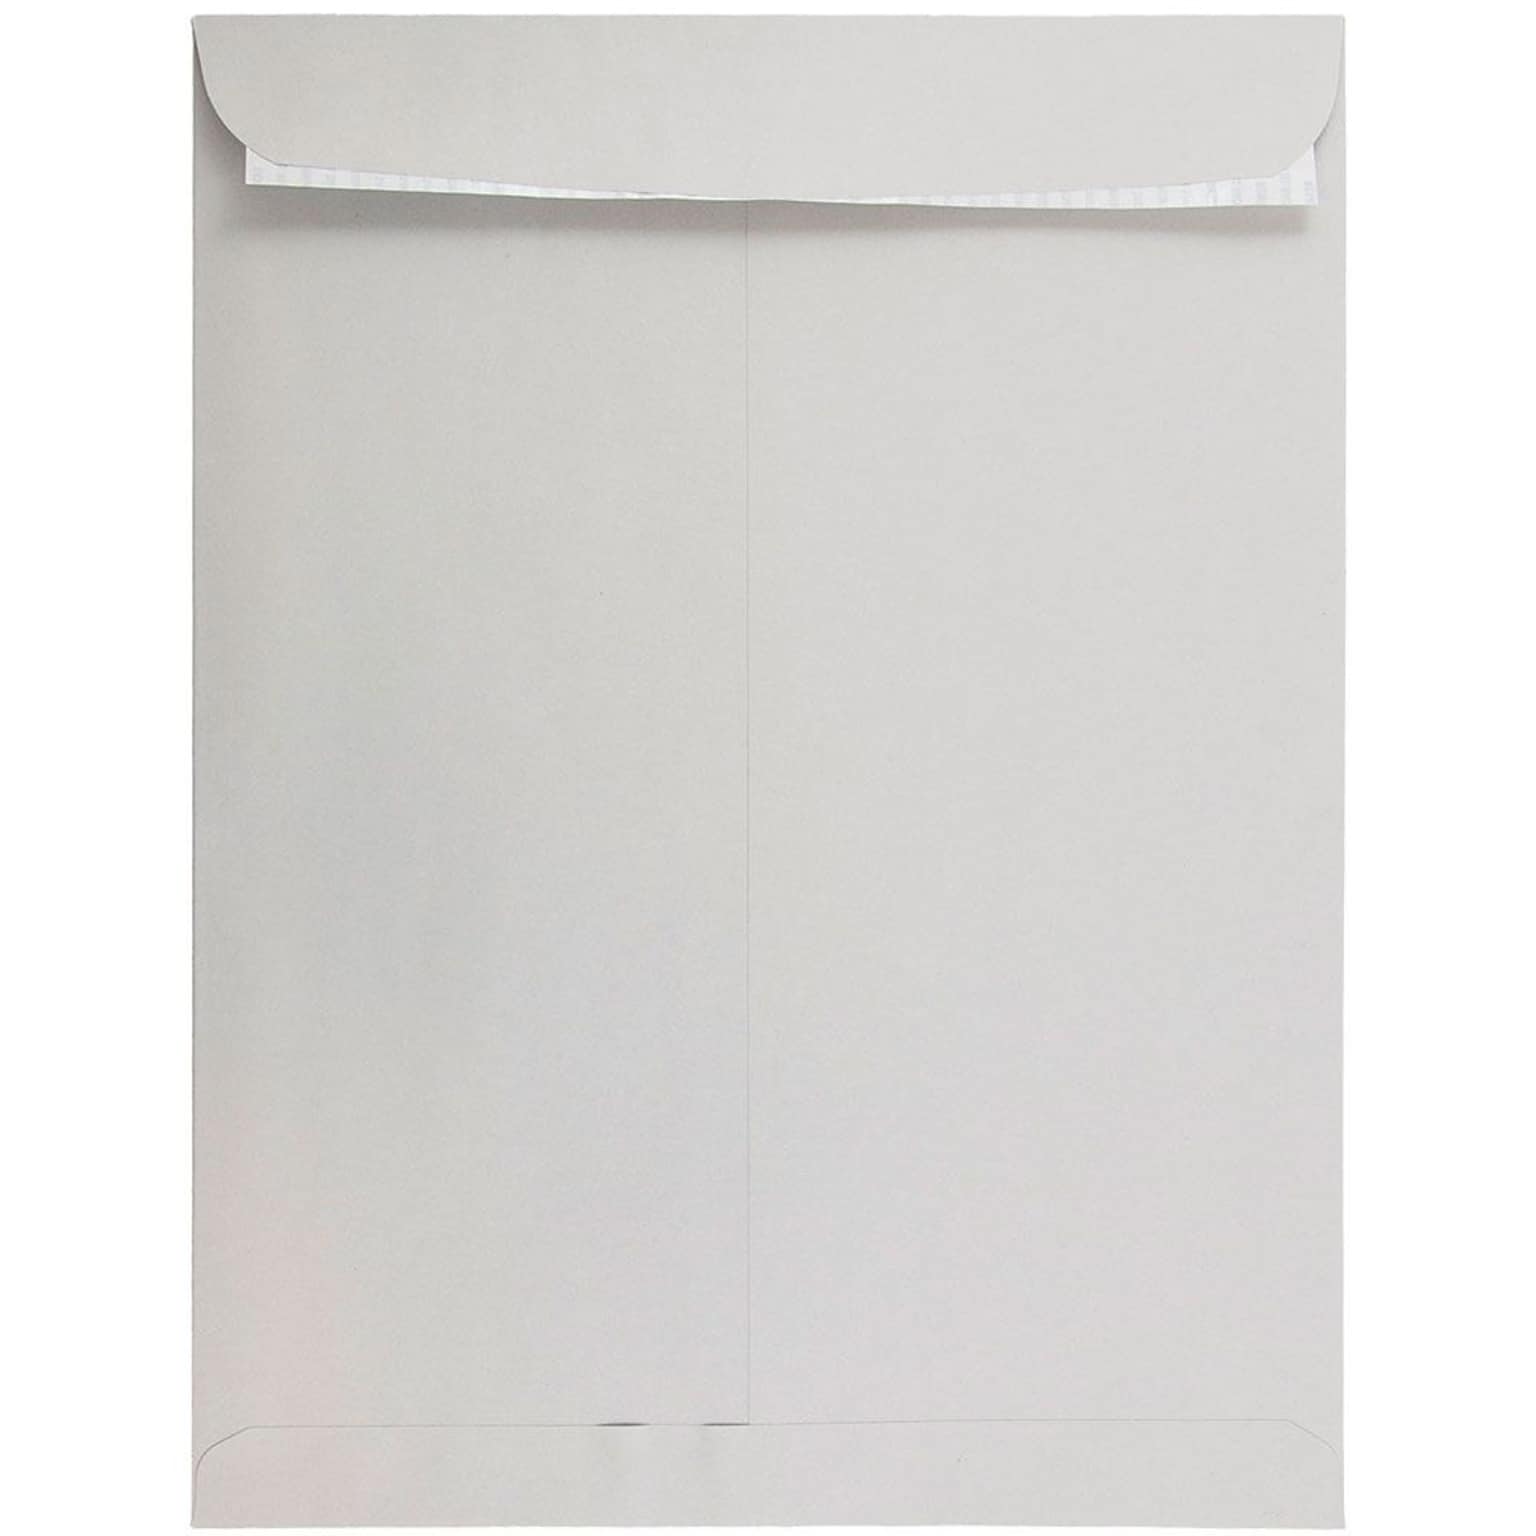 JAM Paper 12 x 15 1/2 Open End Envelopes with Peel and Seal Closure, Light Grey Kraft, 100/Pack (12931117c)